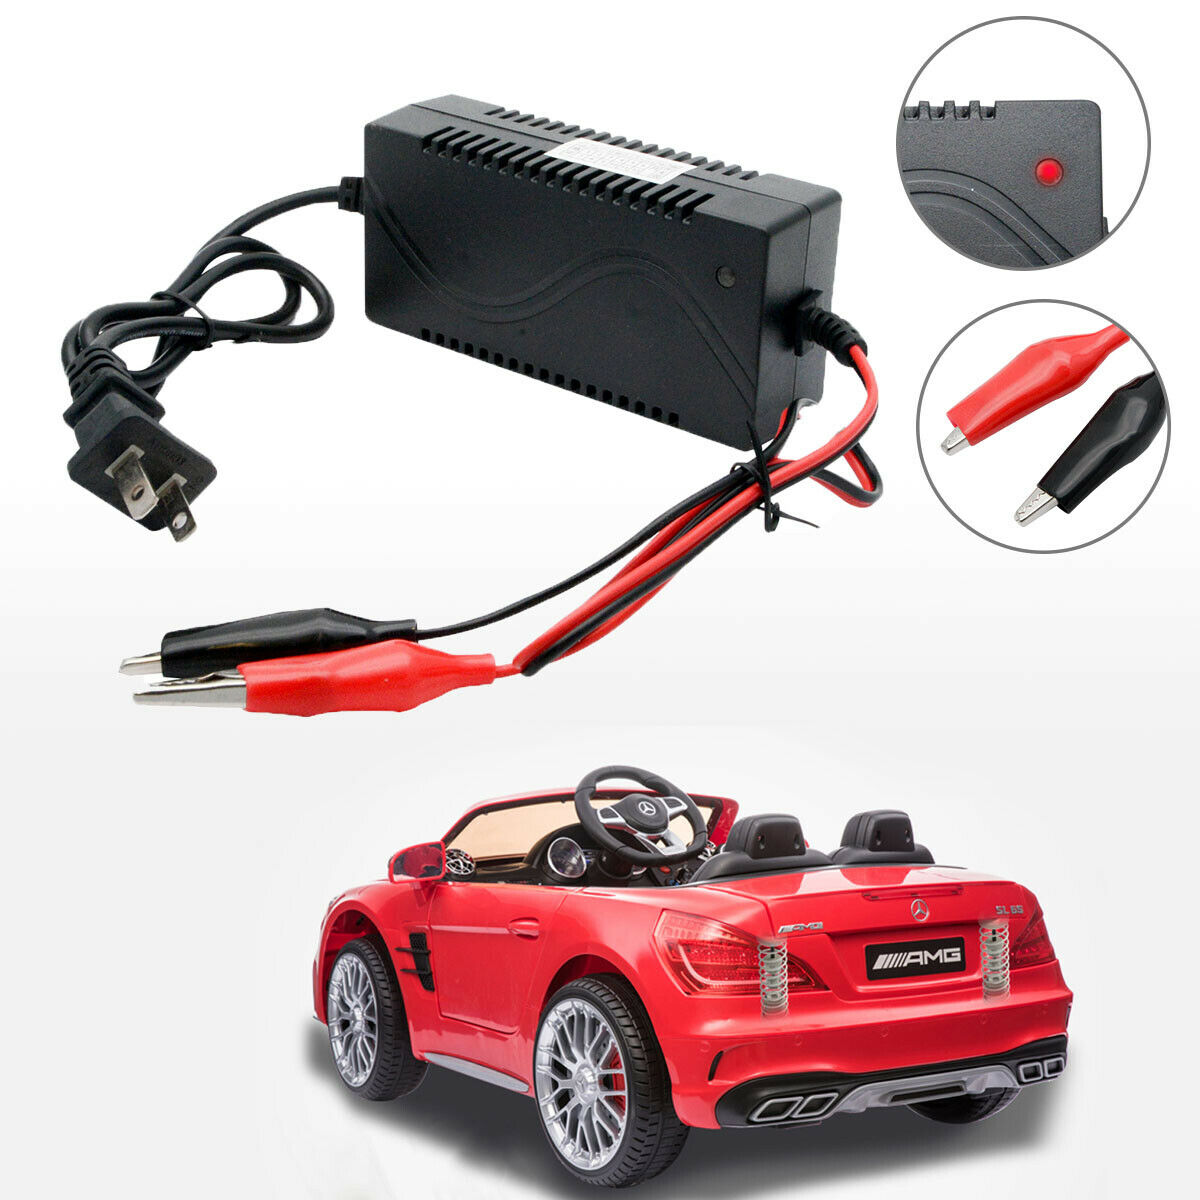 Portable 12V 1A Smart Lead Acid Battery Charger For Toy Car Motorbike Quad Bike I - Click Image to Close